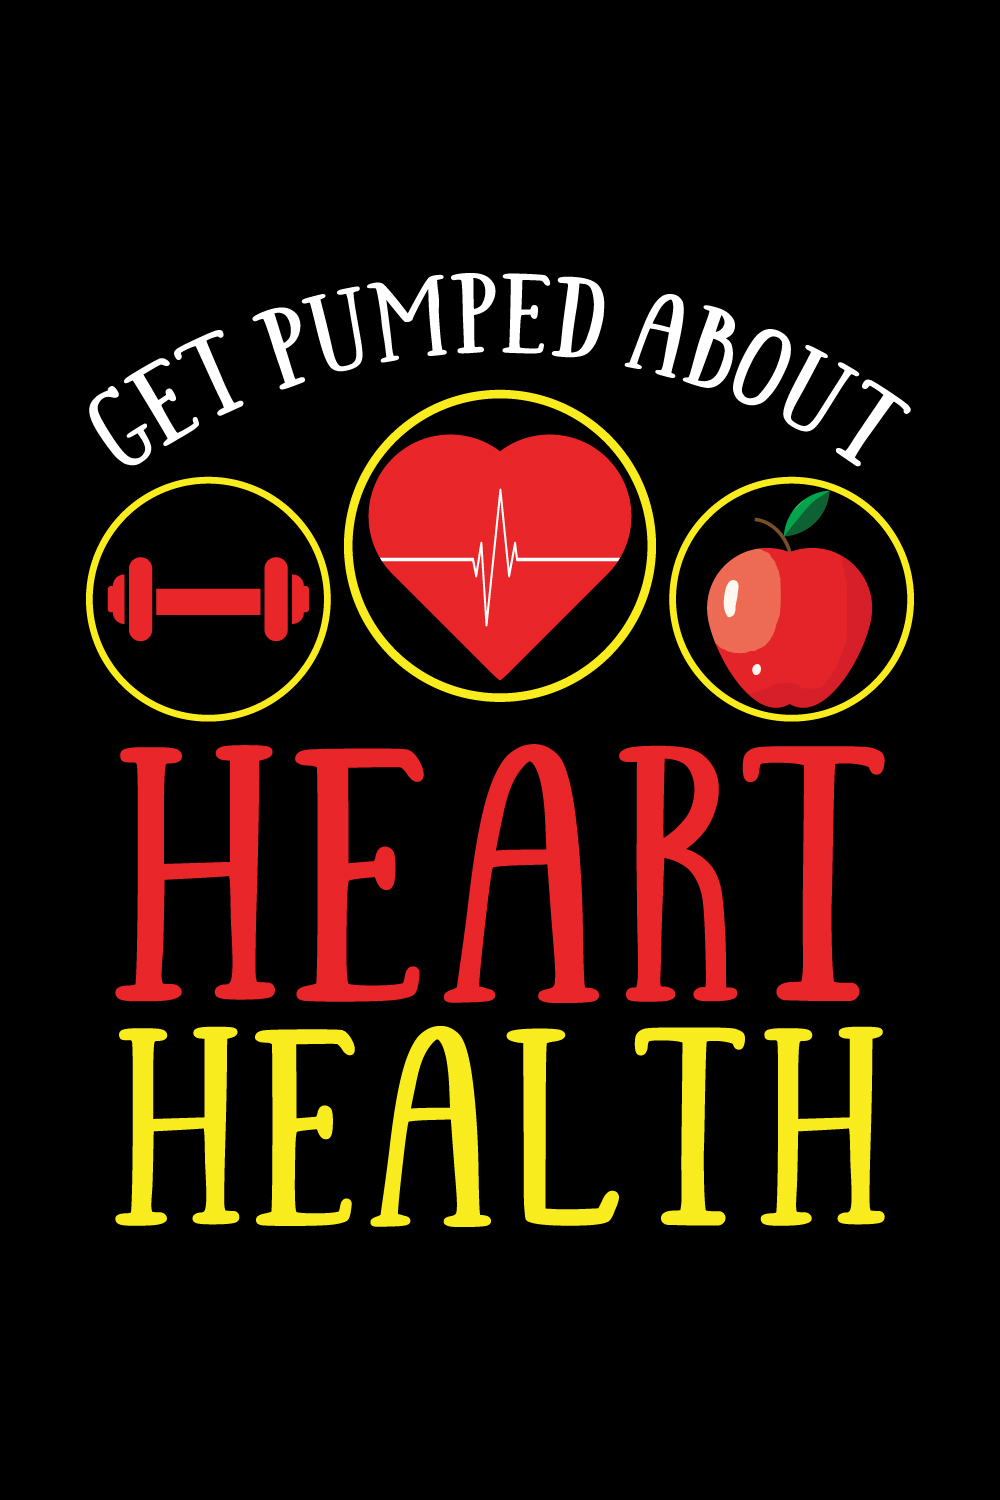 Get Pumped about Heart Health illustrations for print-ready T-Shirts design pinterest preview image.